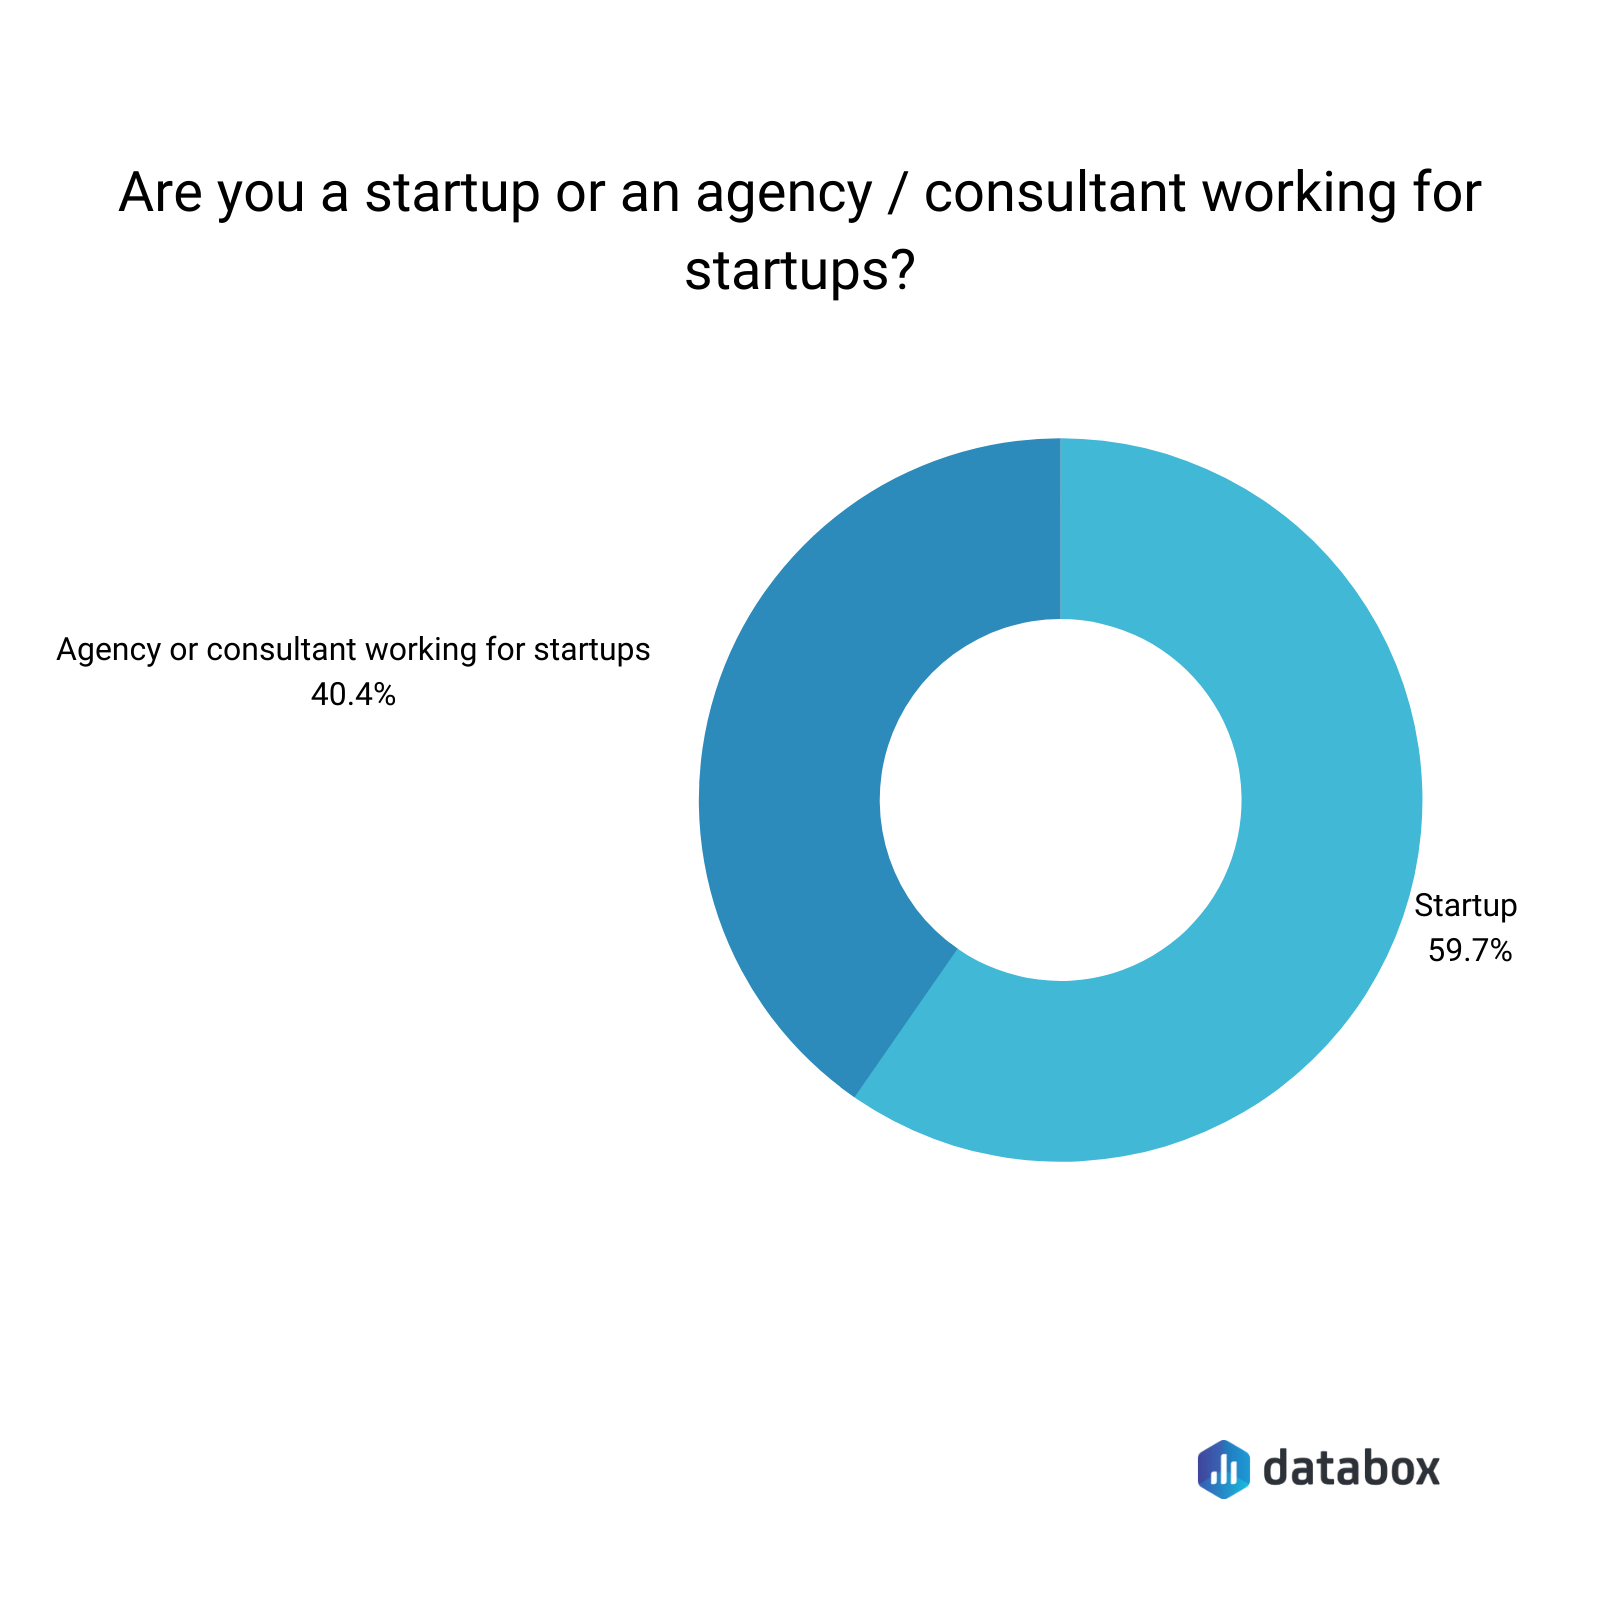 are you a startup or an agency working for startups